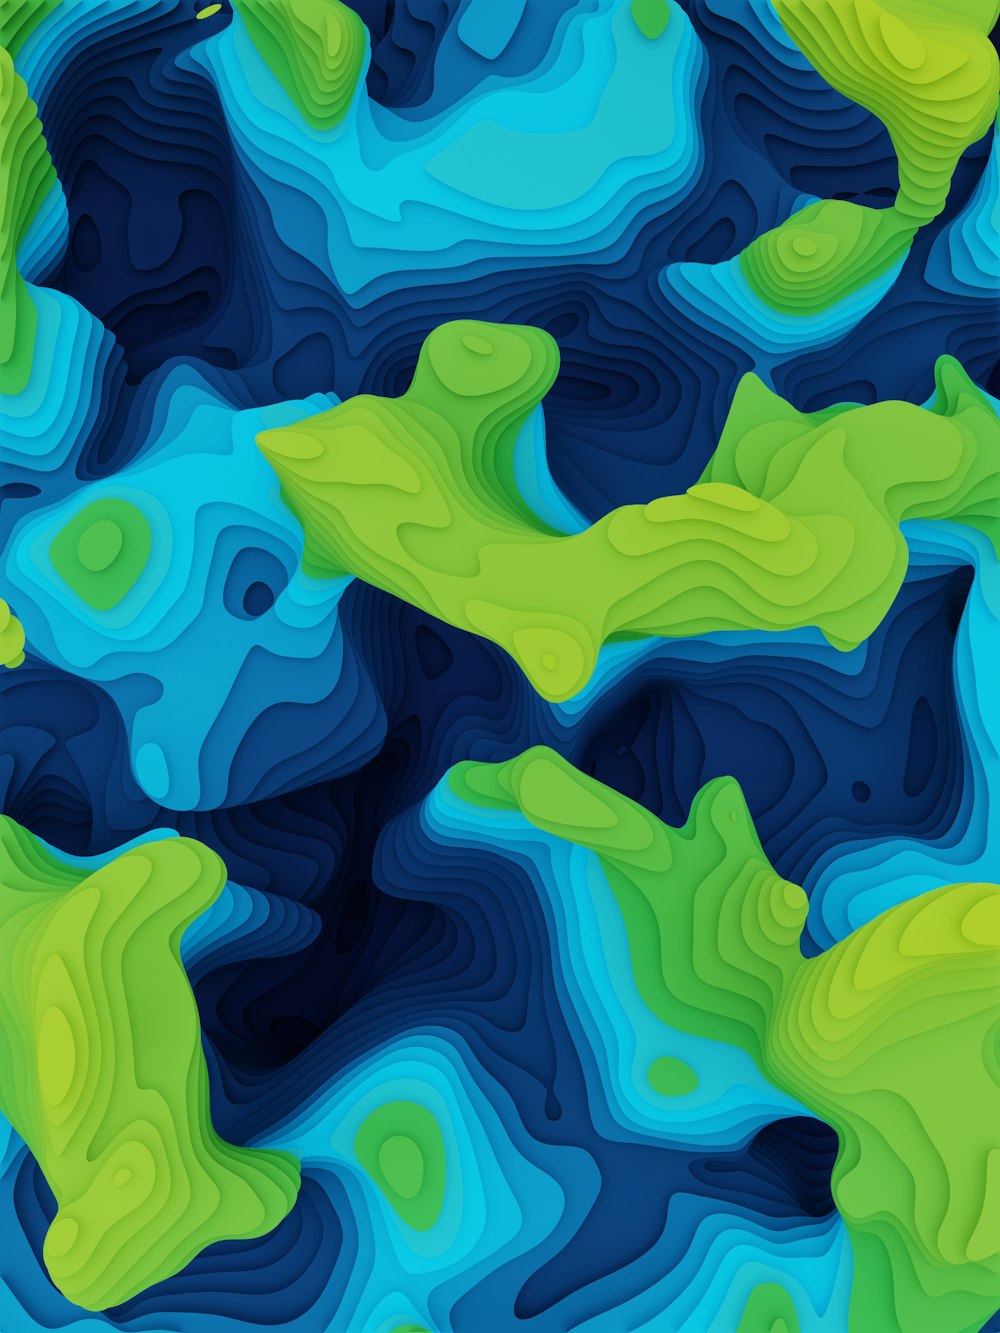 a blue and green abstract background with wavy shapes